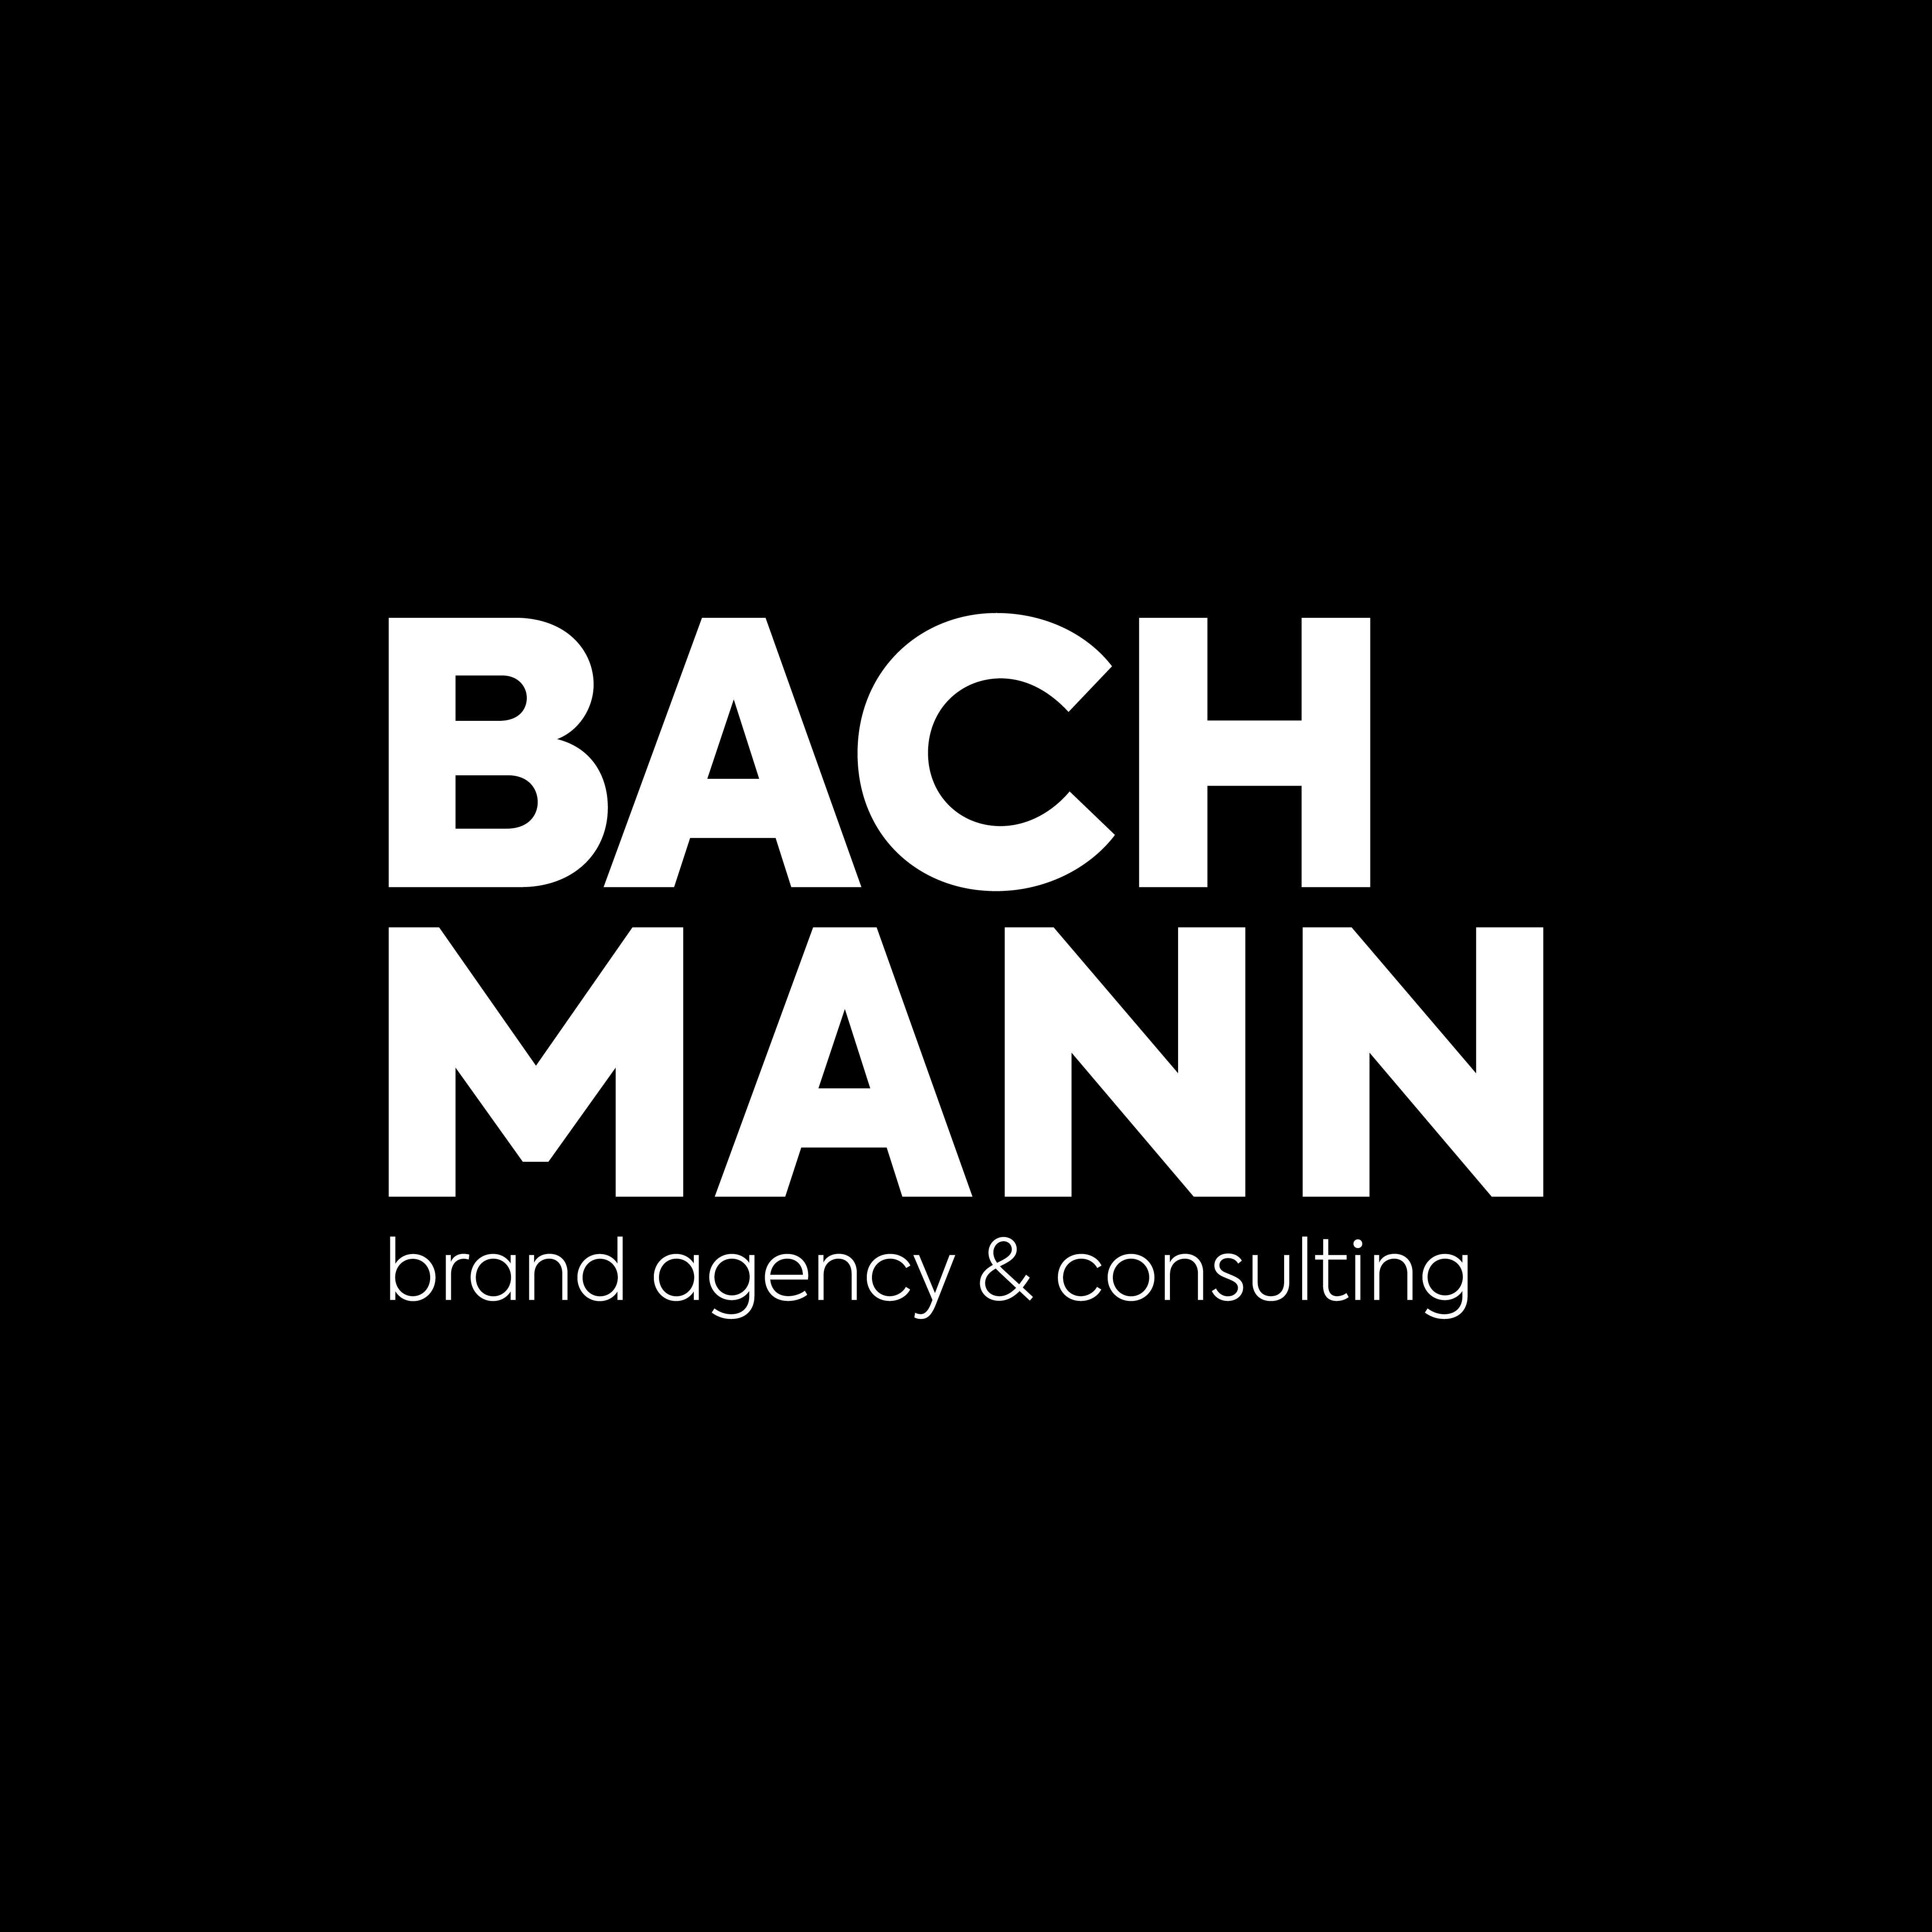 Bachmann brand agency & consulting